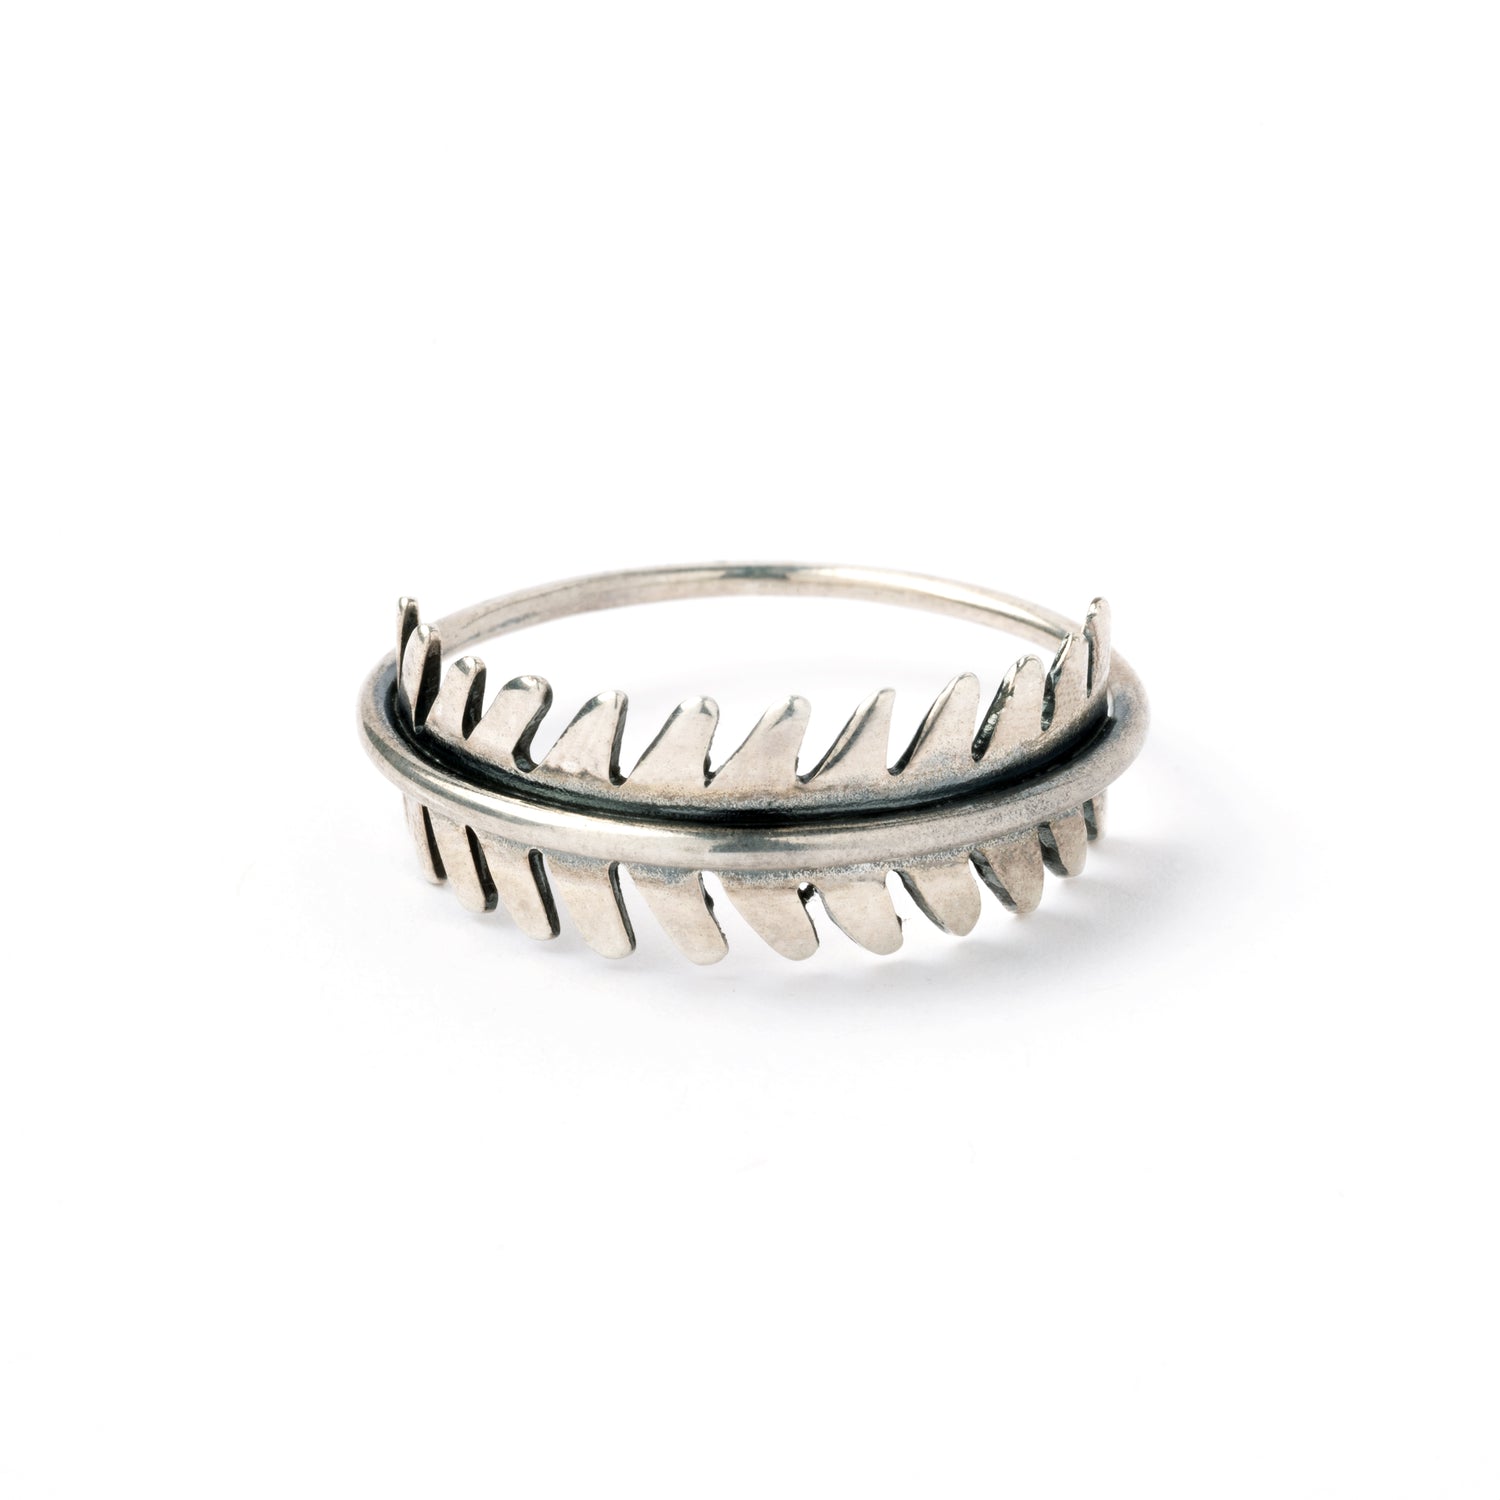 Wrapped Leaf Silver Ring